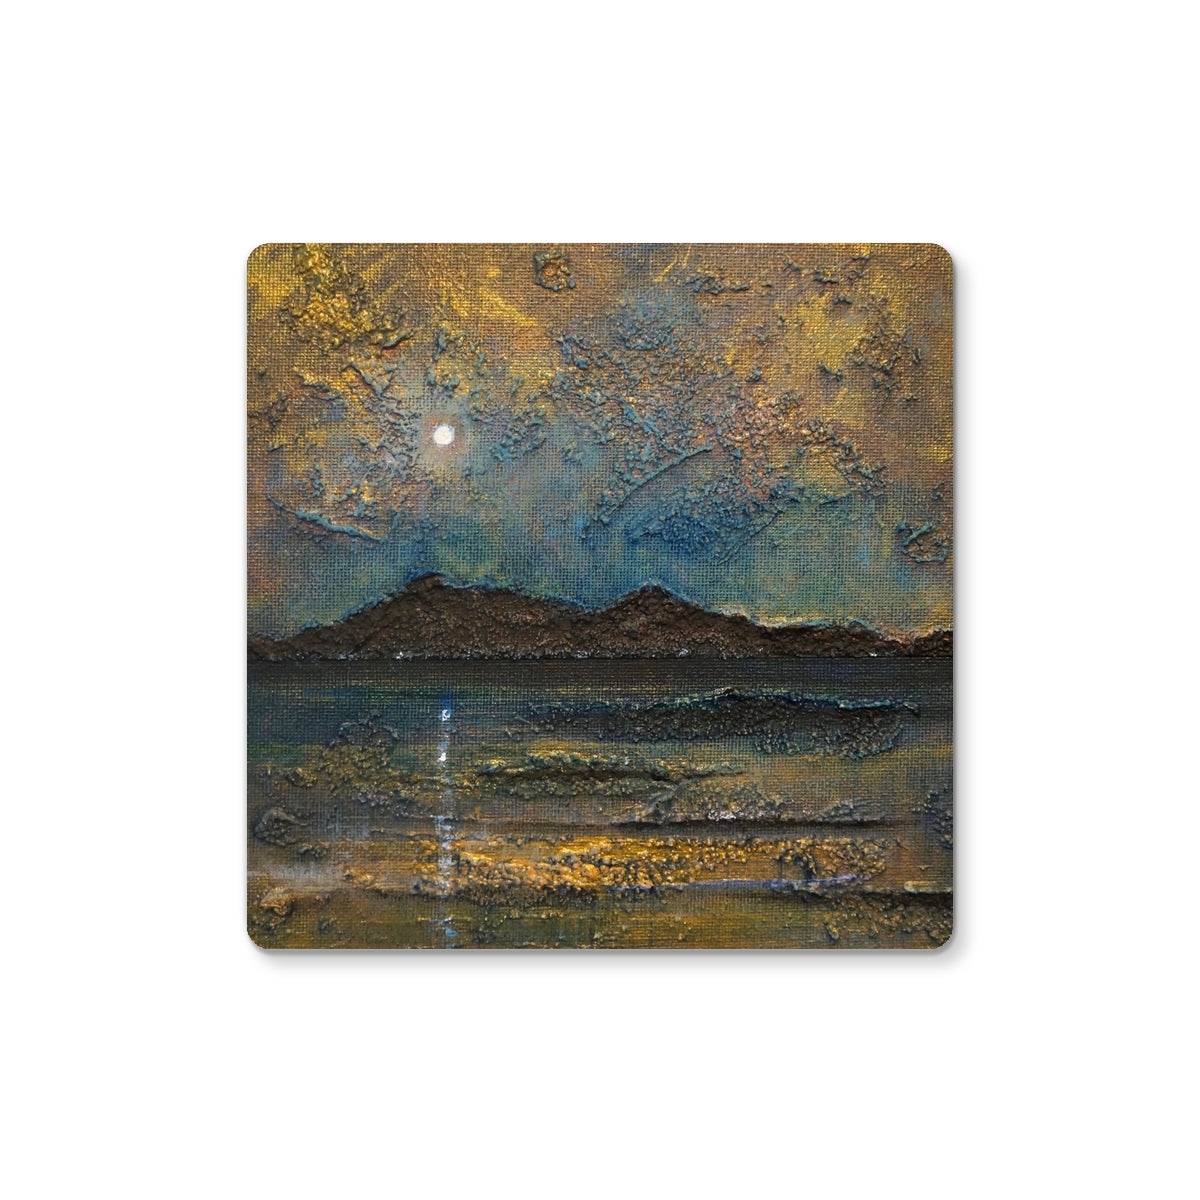 Arran Moonlight Art Gifts Coaster-Coasters-Arran Art Gallery-2 Coasters-Paintings, Prints, Homeware, Art Gifts From Scotland By Scottish Artist Kevin Hunter